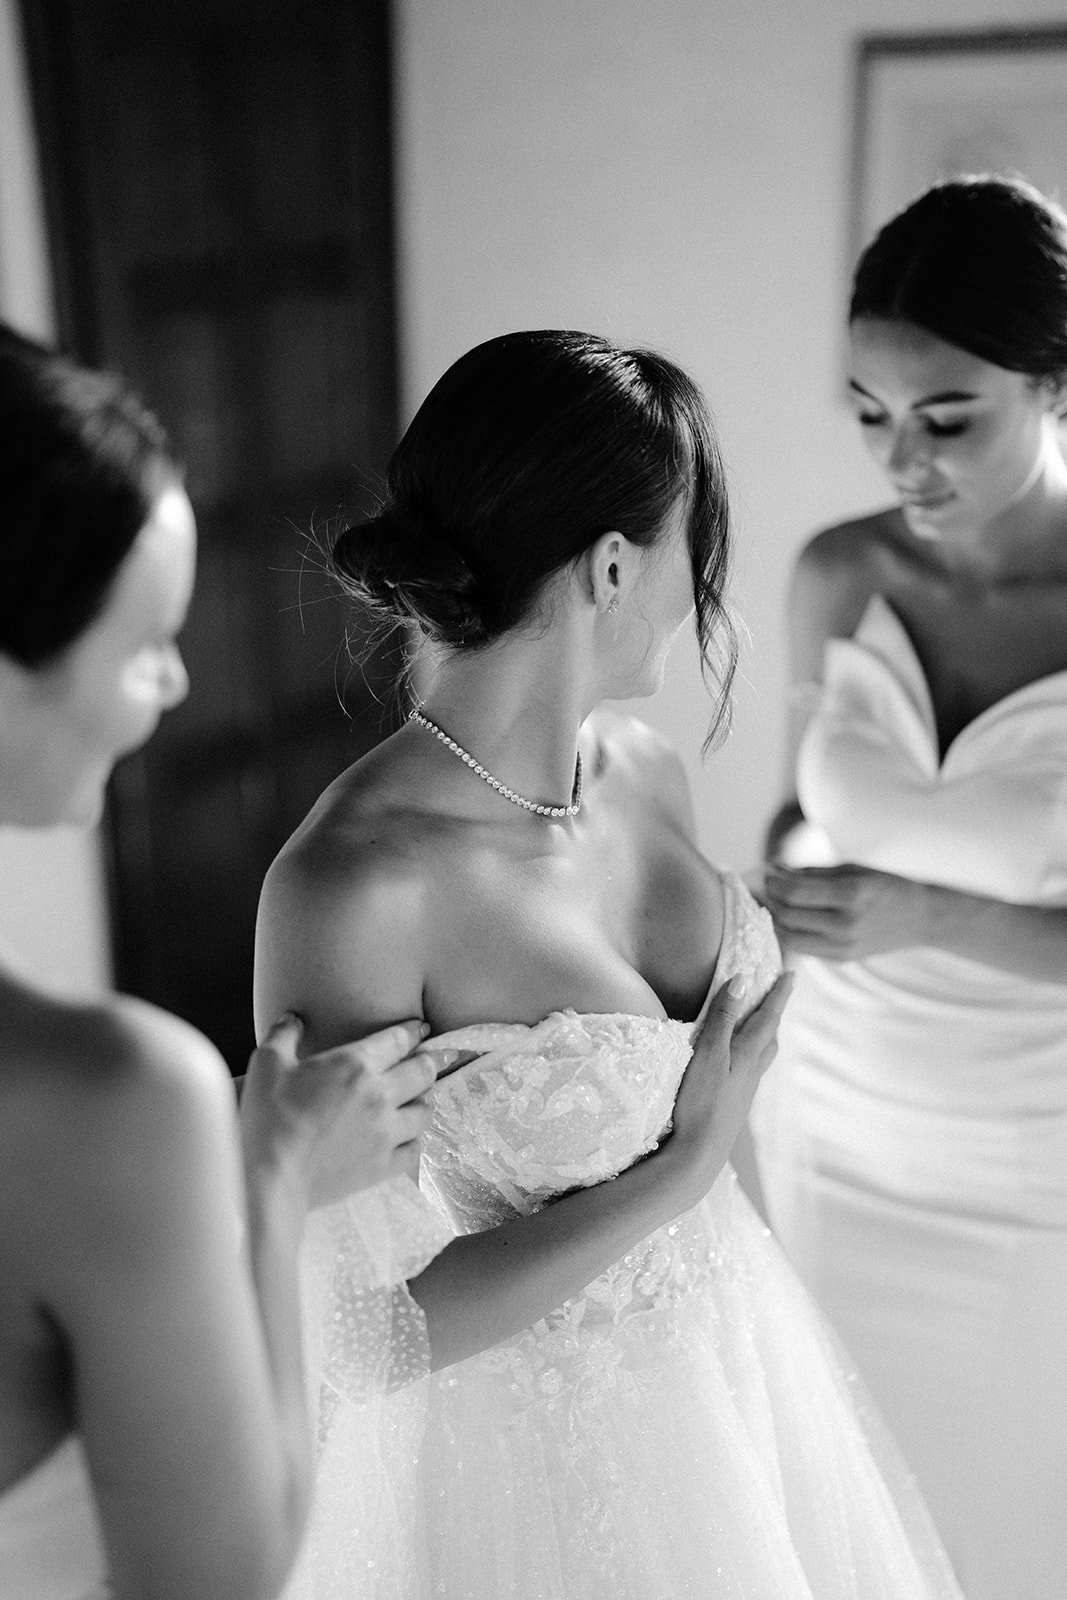 The bride is wearing a strapless gown, assisted by the bridesmaids